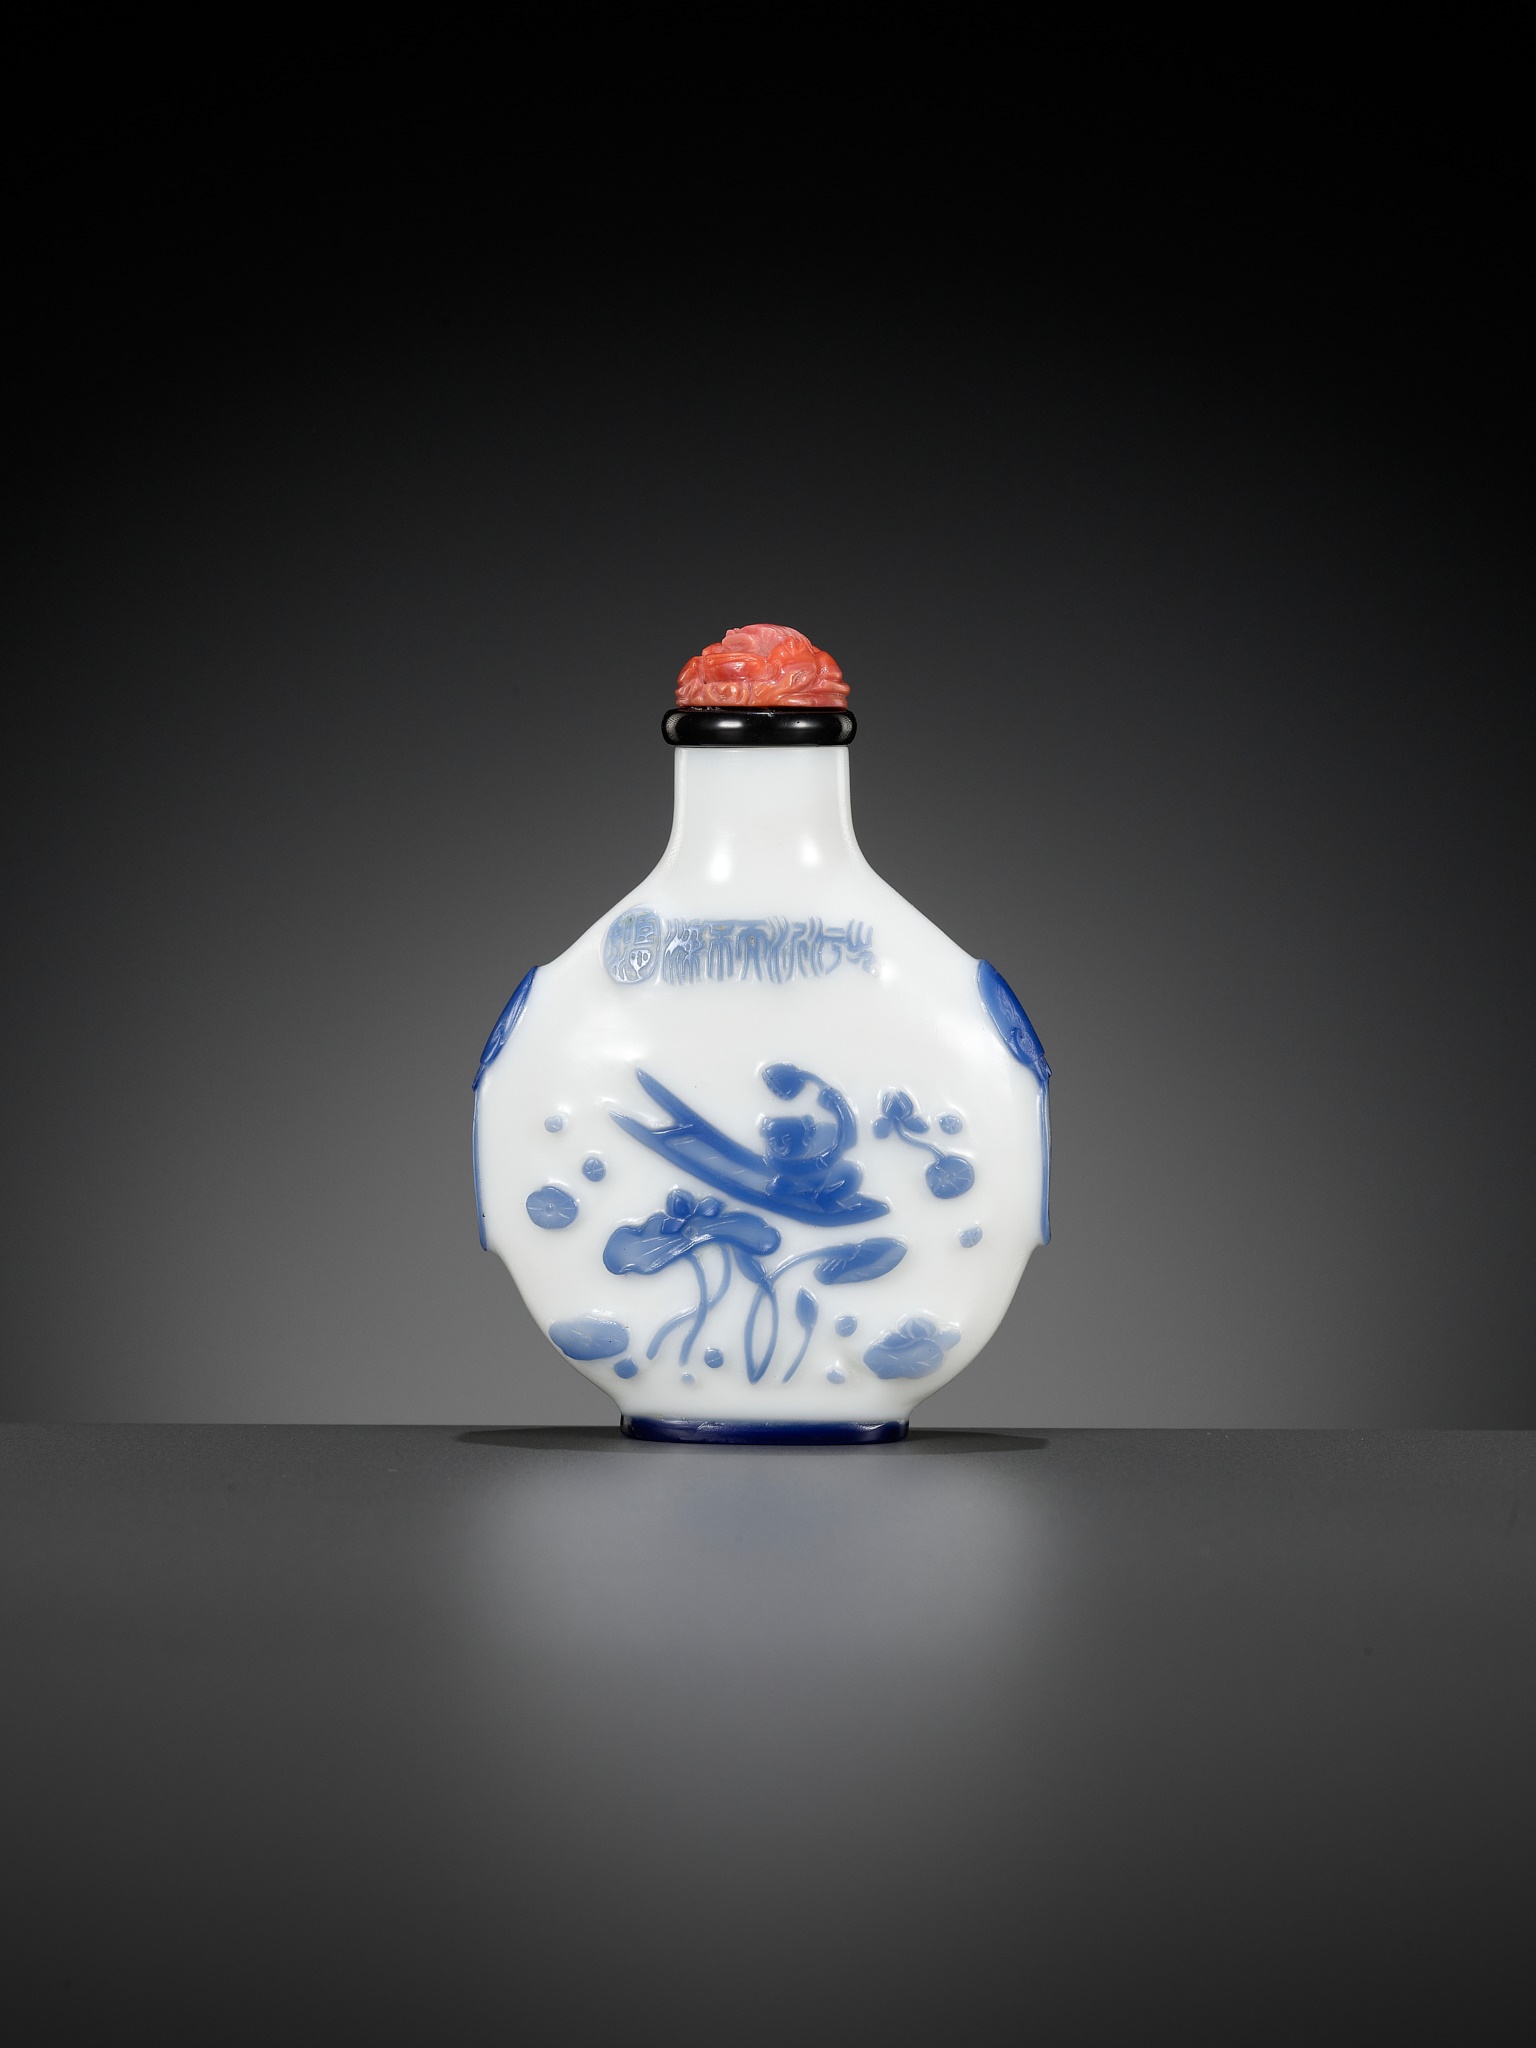 AN INSCRIBED SAPPHIRE-BLUE OVERLAY GLASS SNUFF BOTTLE, YANGZHOU SCHOOL, CHINA, 1800-1880 - Image 12 of 20